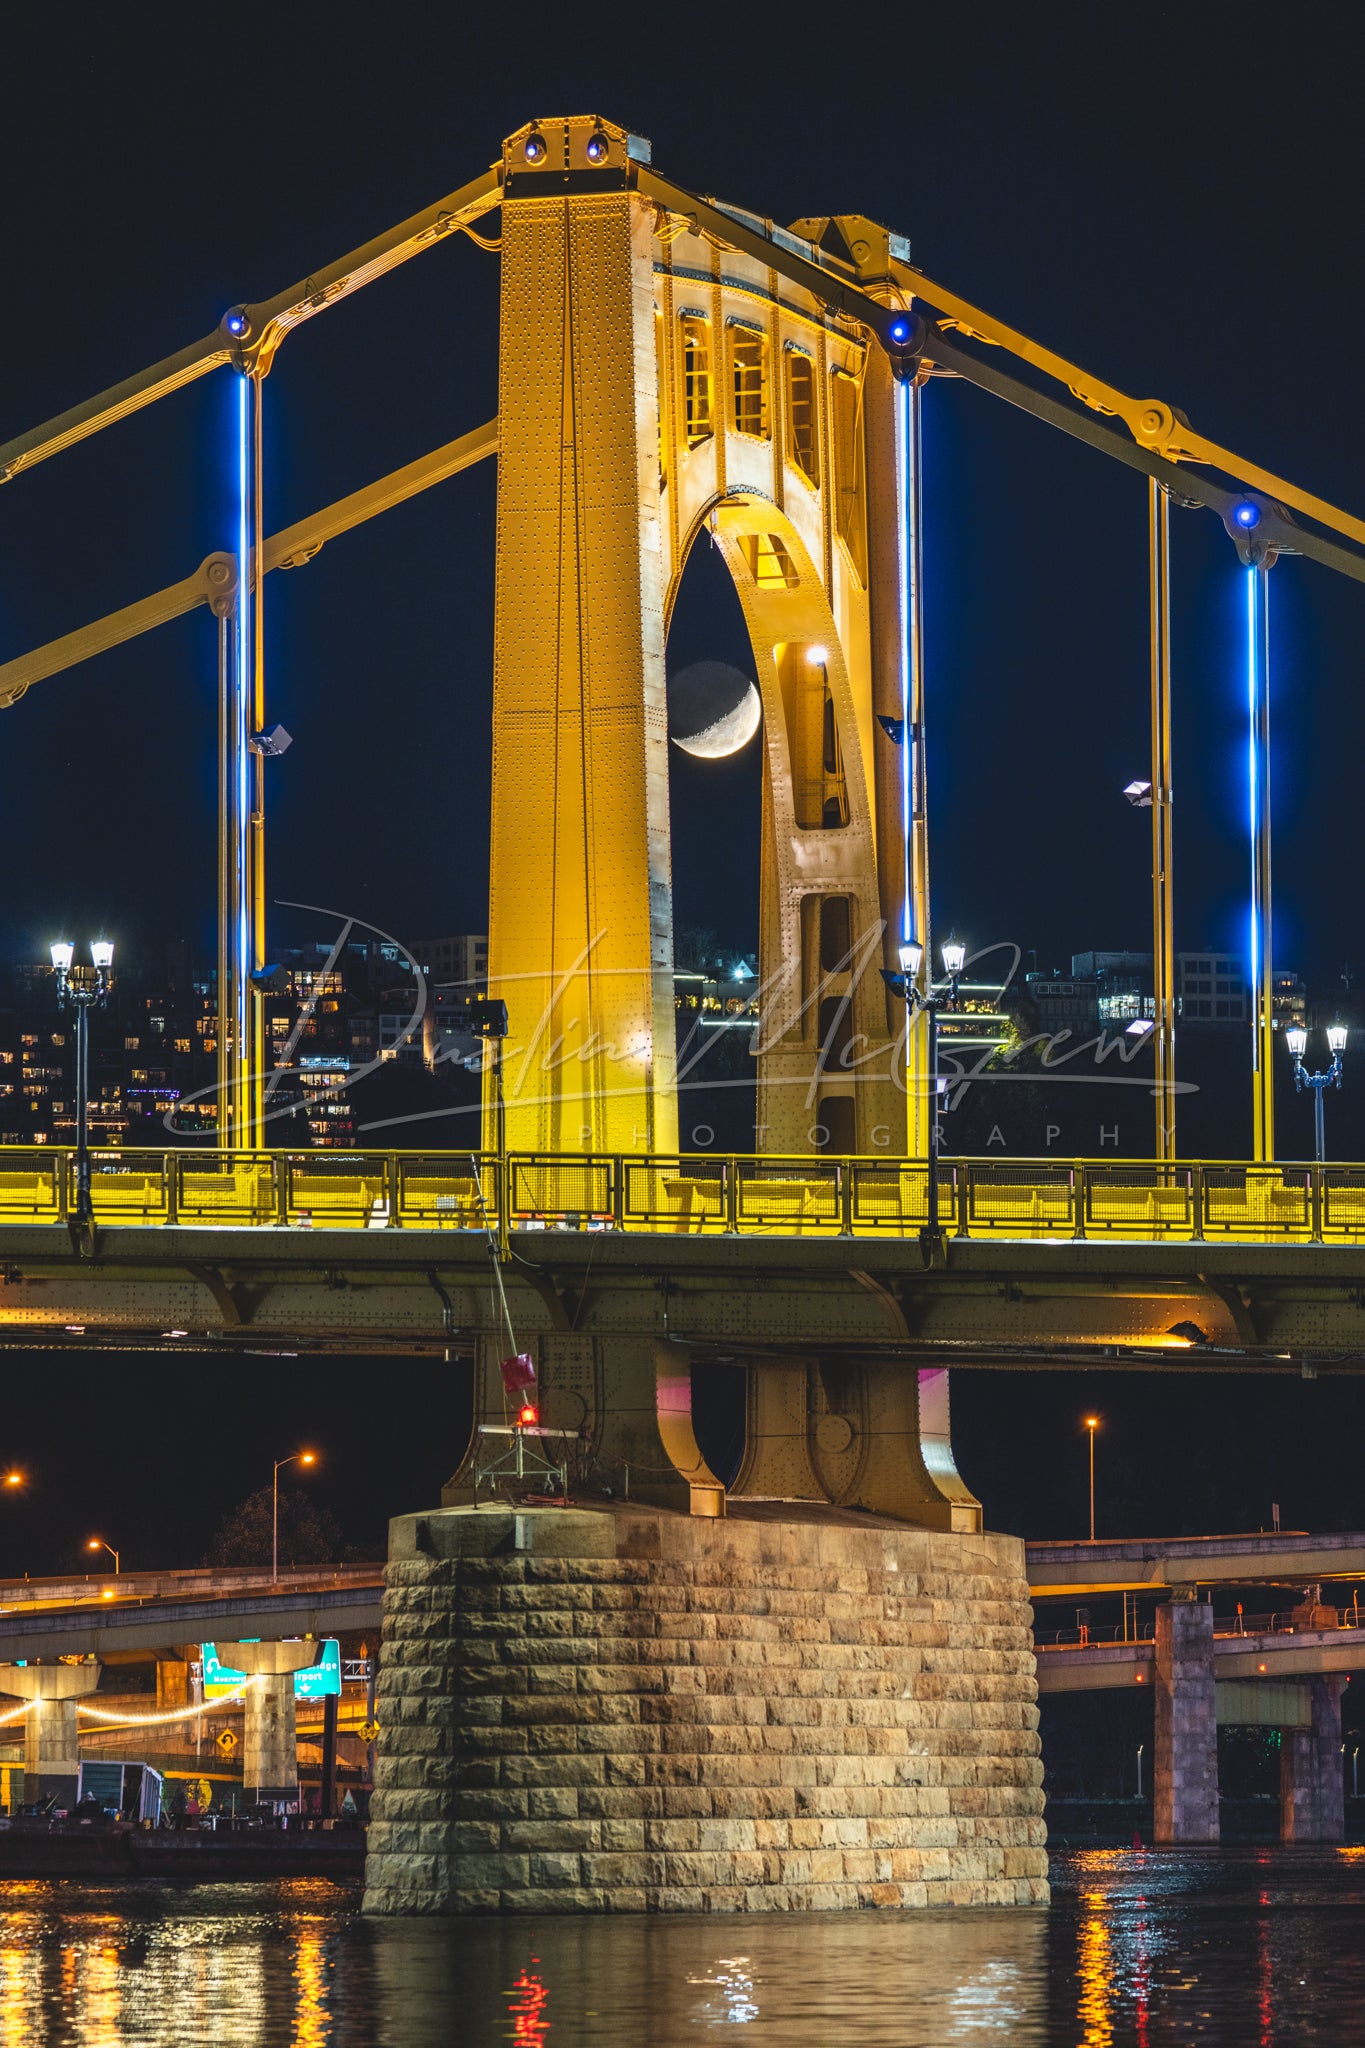 The Moon and Clemente Bridge